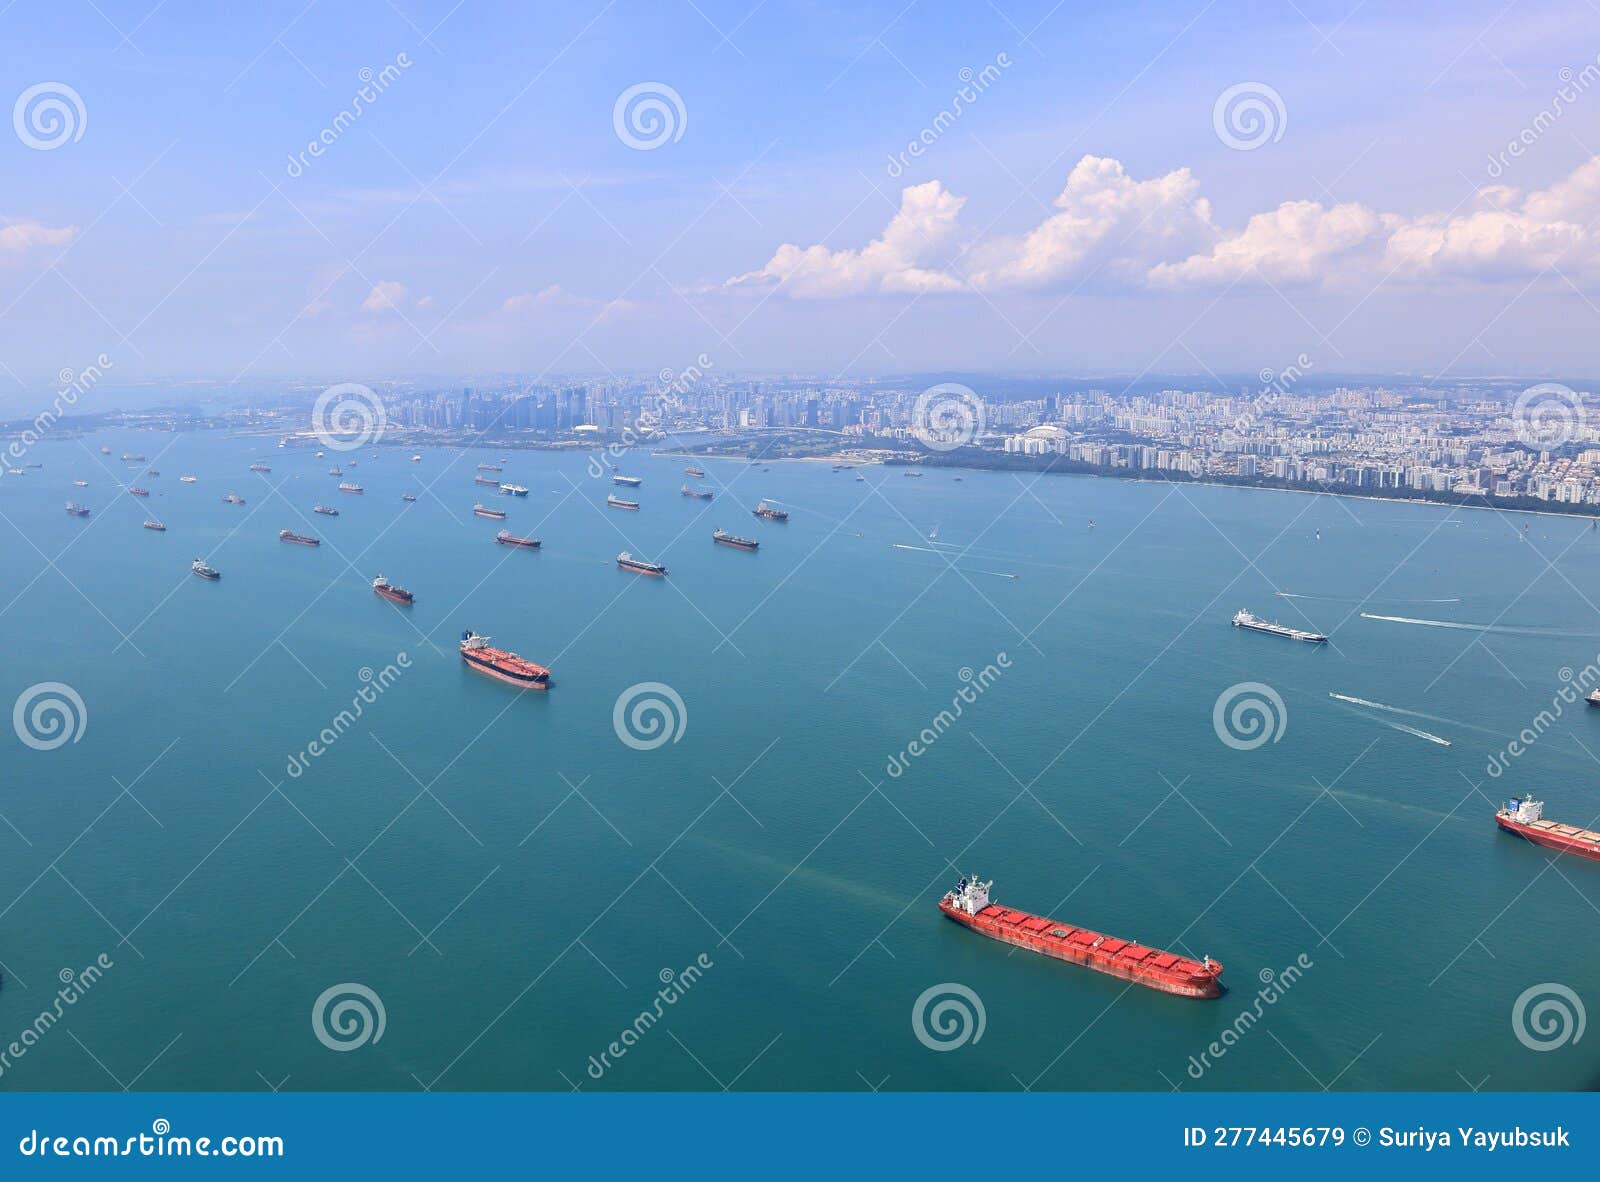 ocean liner, tanker and cargo ship in singapore strait and singapore city, see from plane.